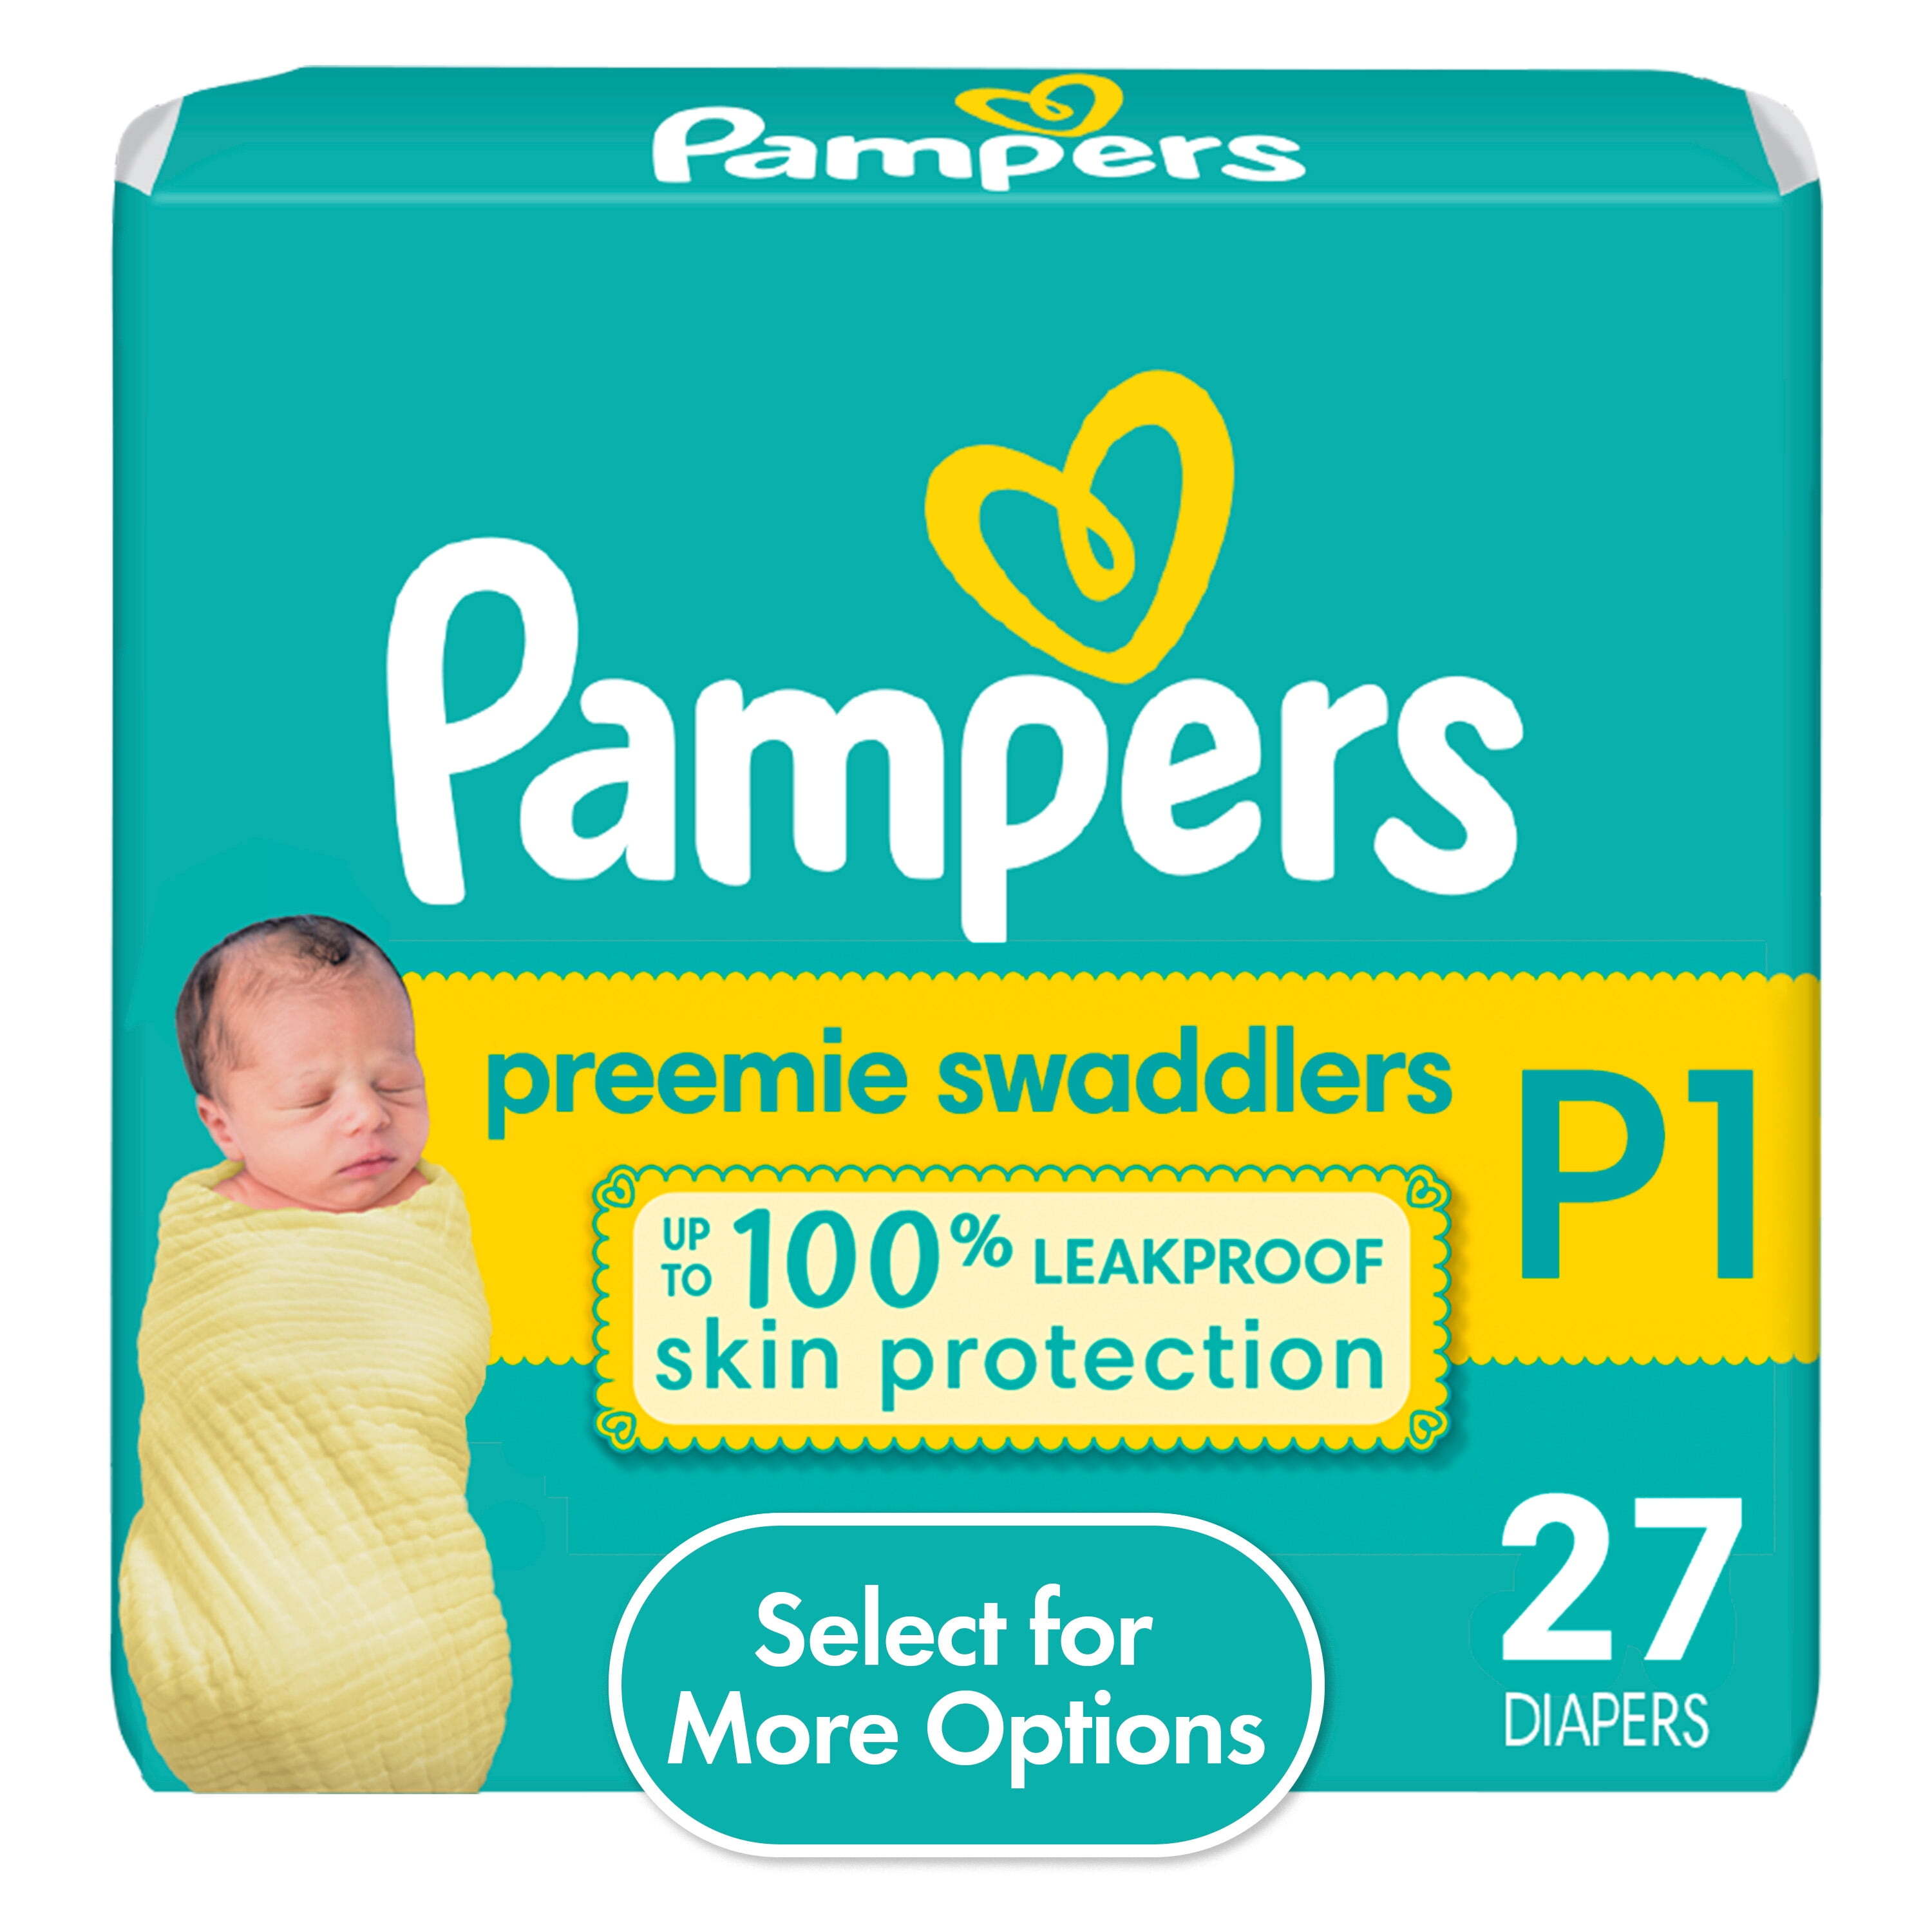 Pampers Swaddlers Diapers Size Preemie, 27 Count (Select for More Options) - image 1 of 12